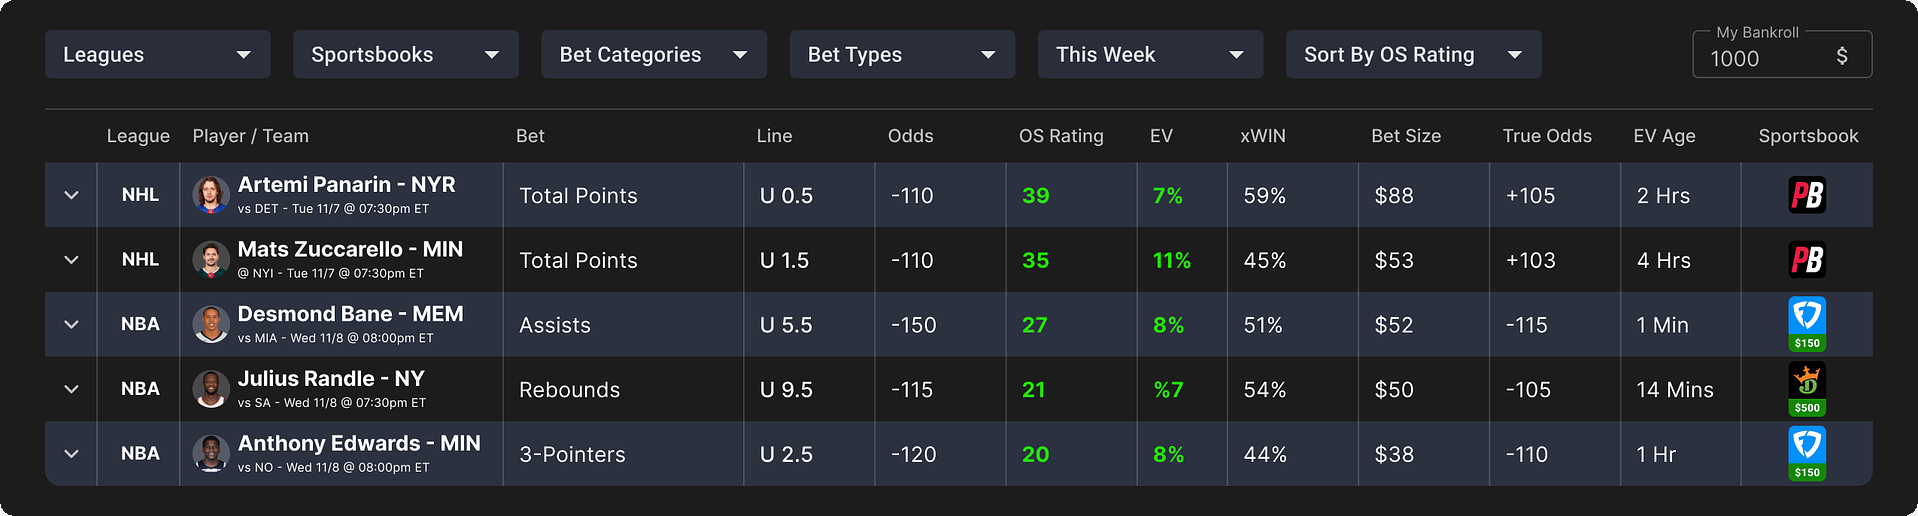 Sports Betting & Odds Comparison